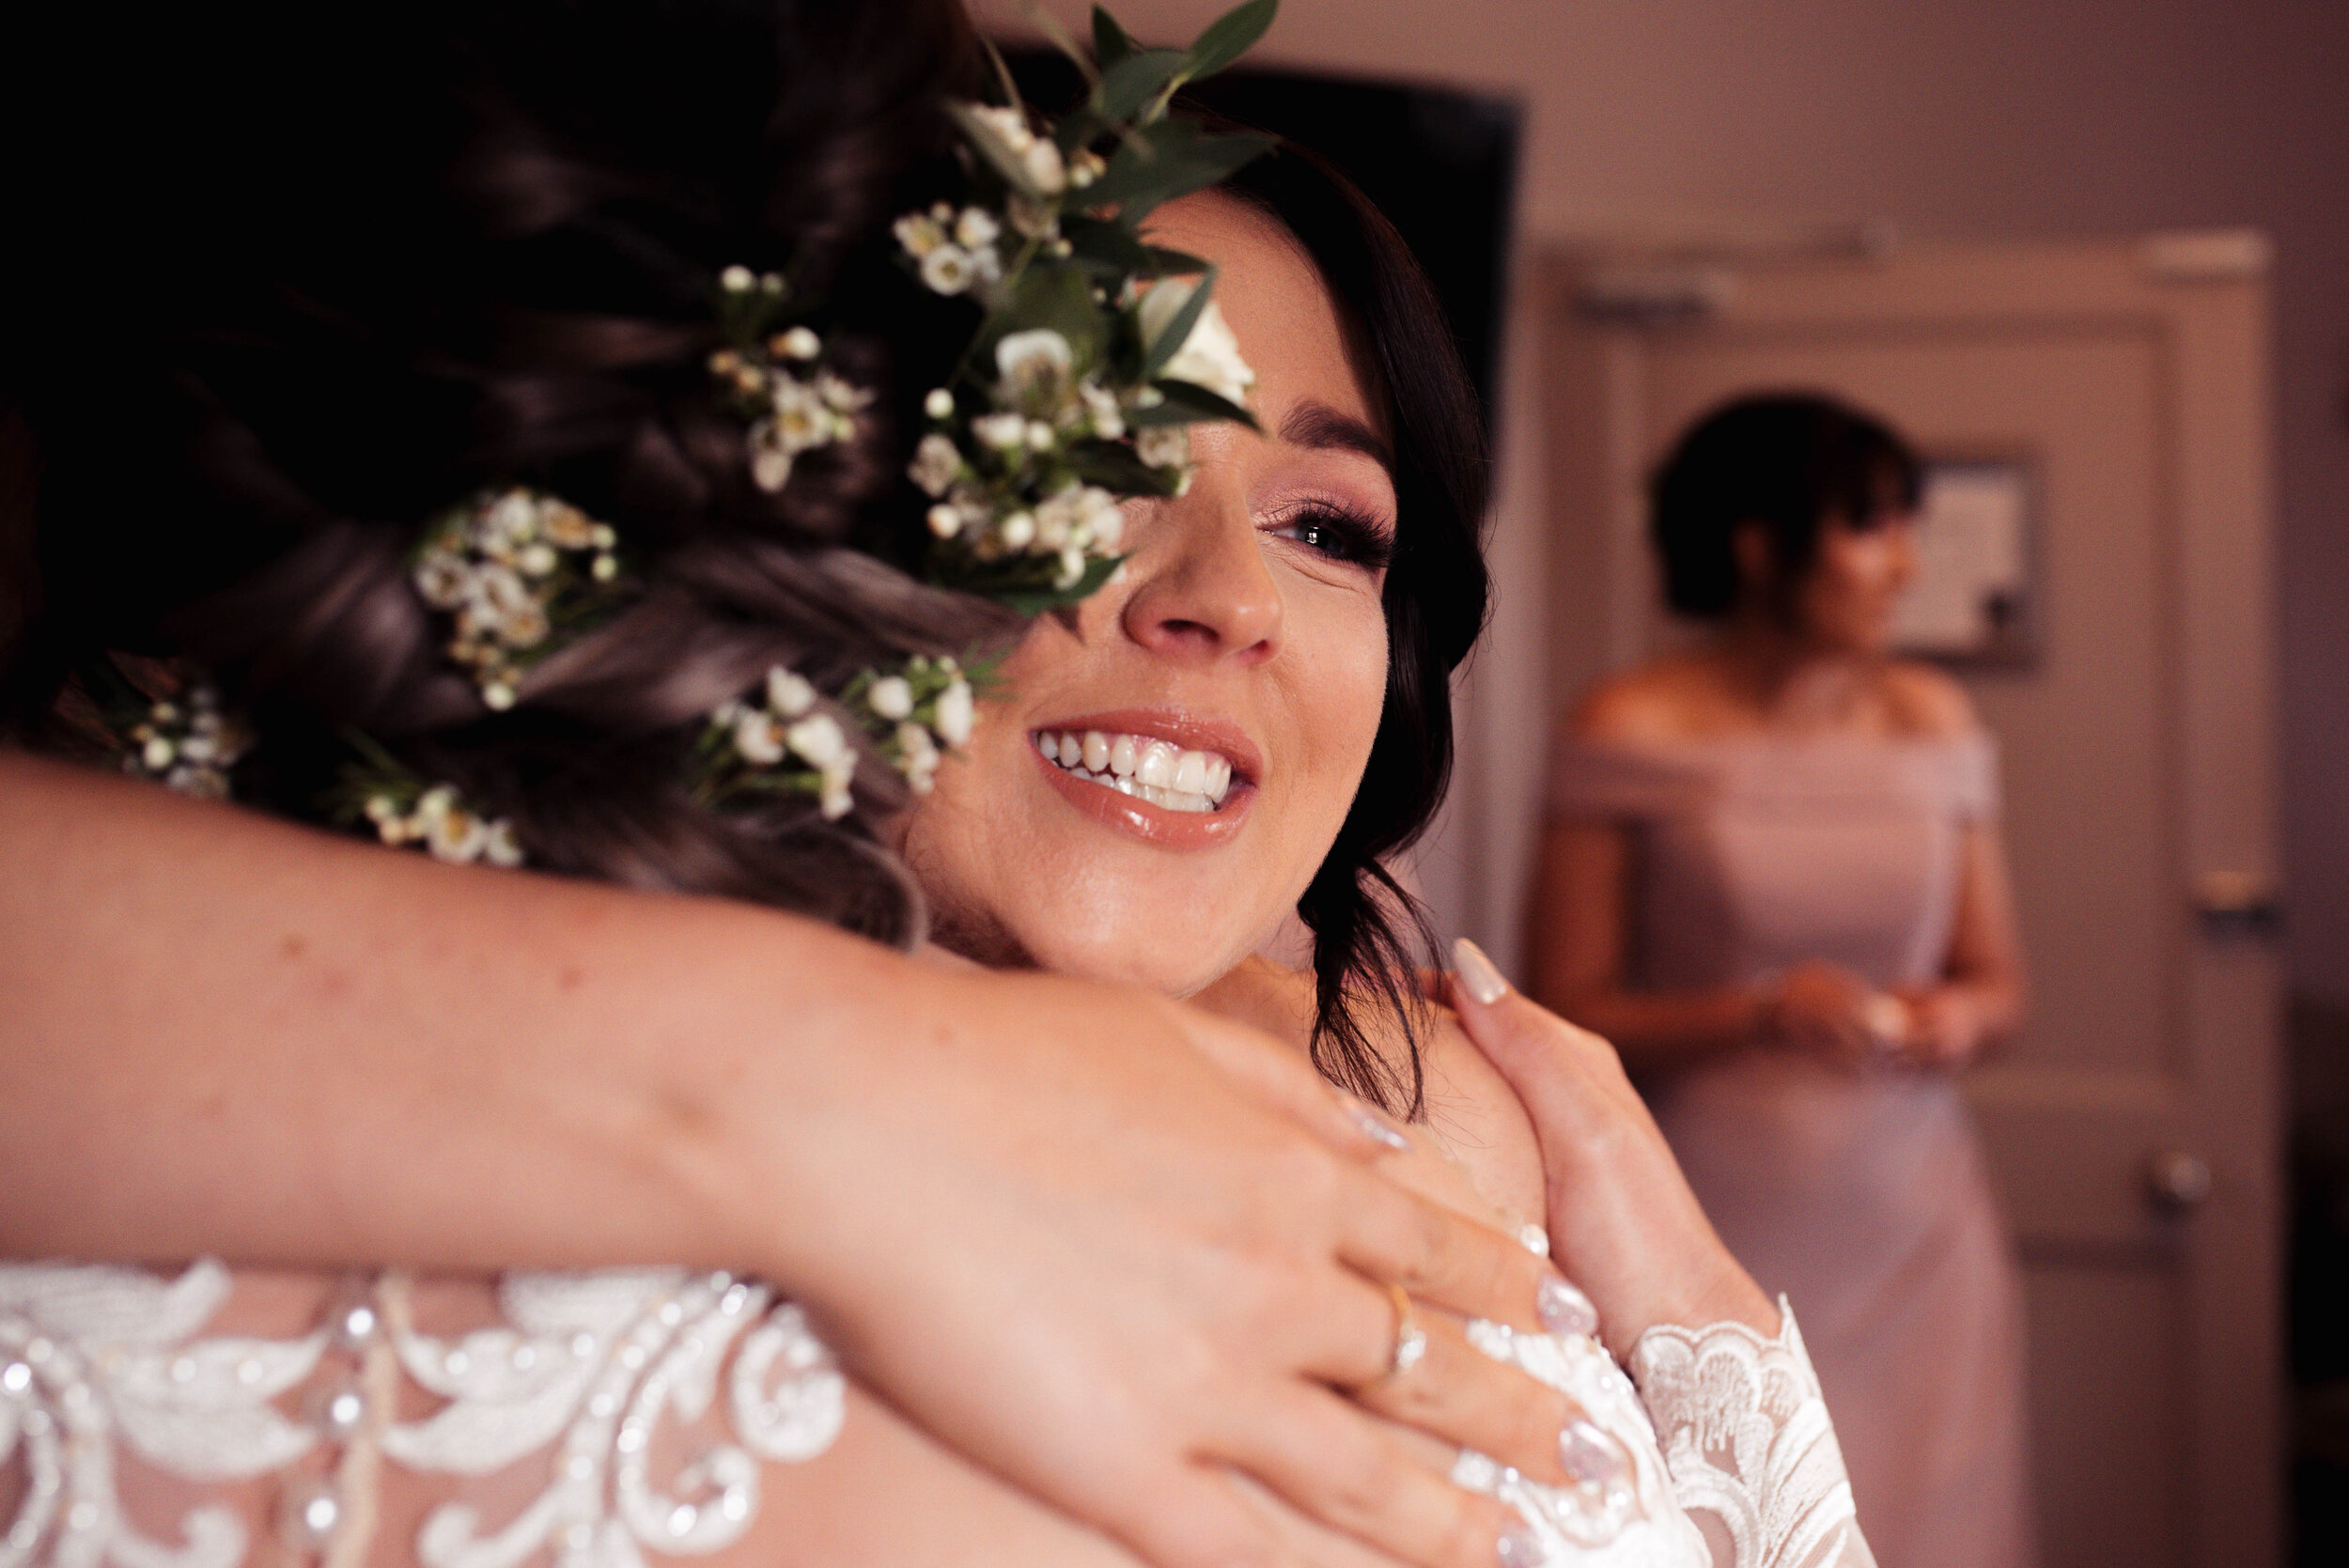 A bridesmaid gives the bride a big cuddle before the wedding